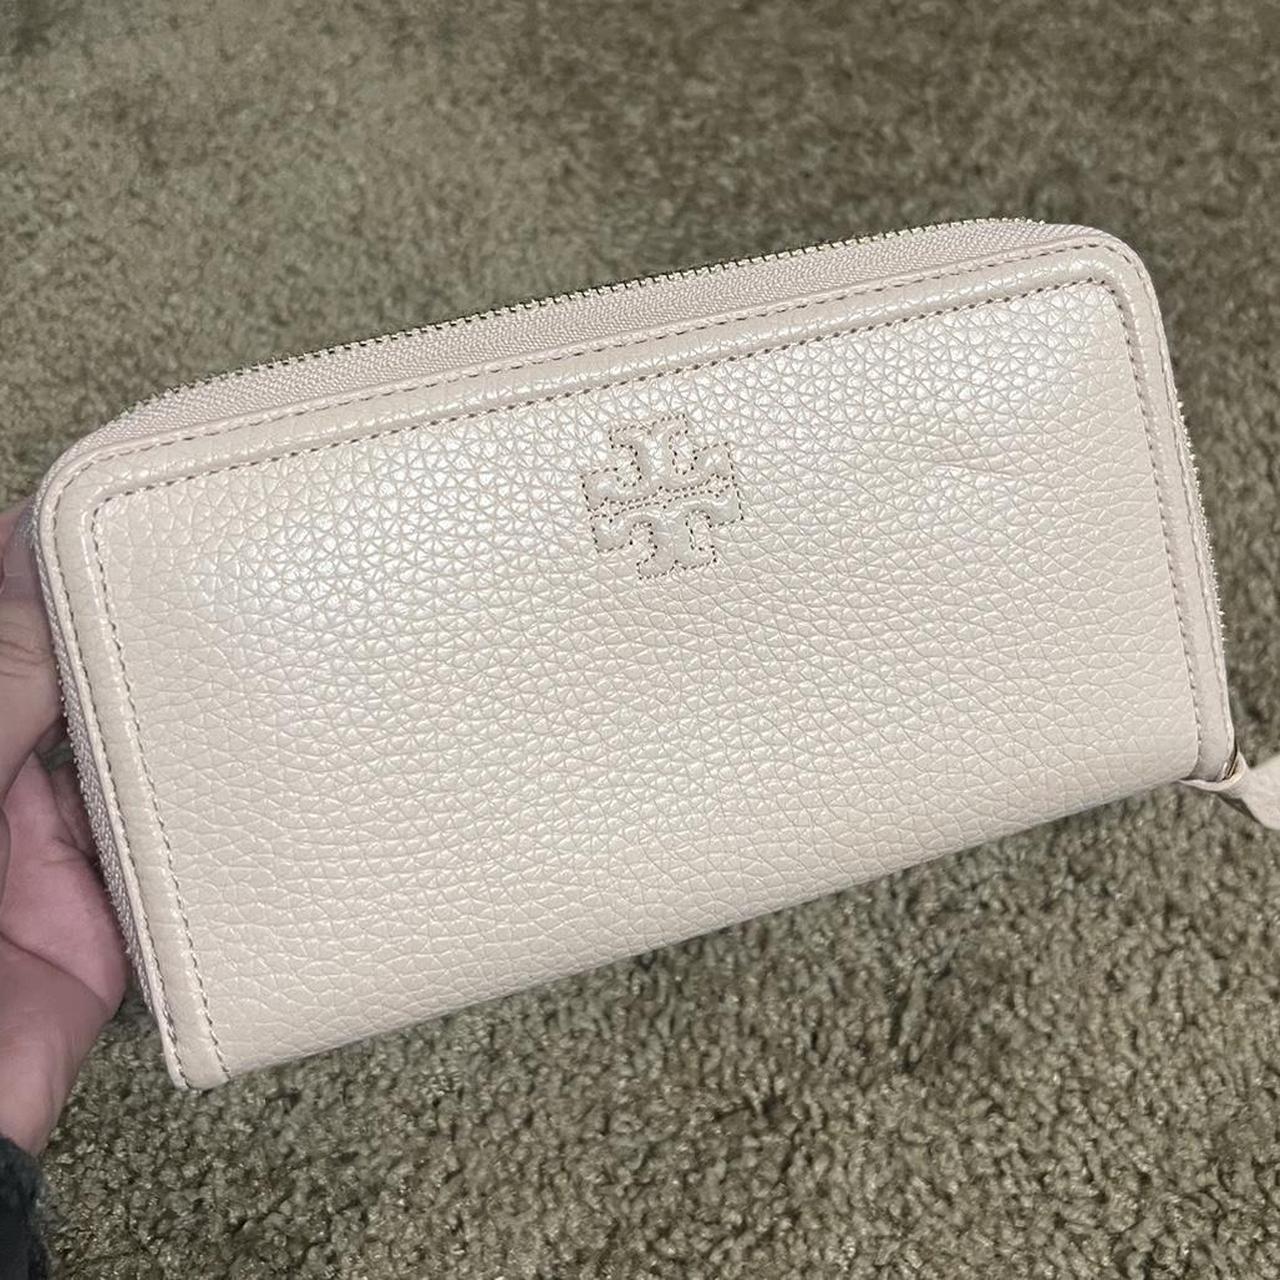 How to Tell if Your Tory Burch Handbag is Genuine: The Mark of Quality –  Too Good To Be Threw